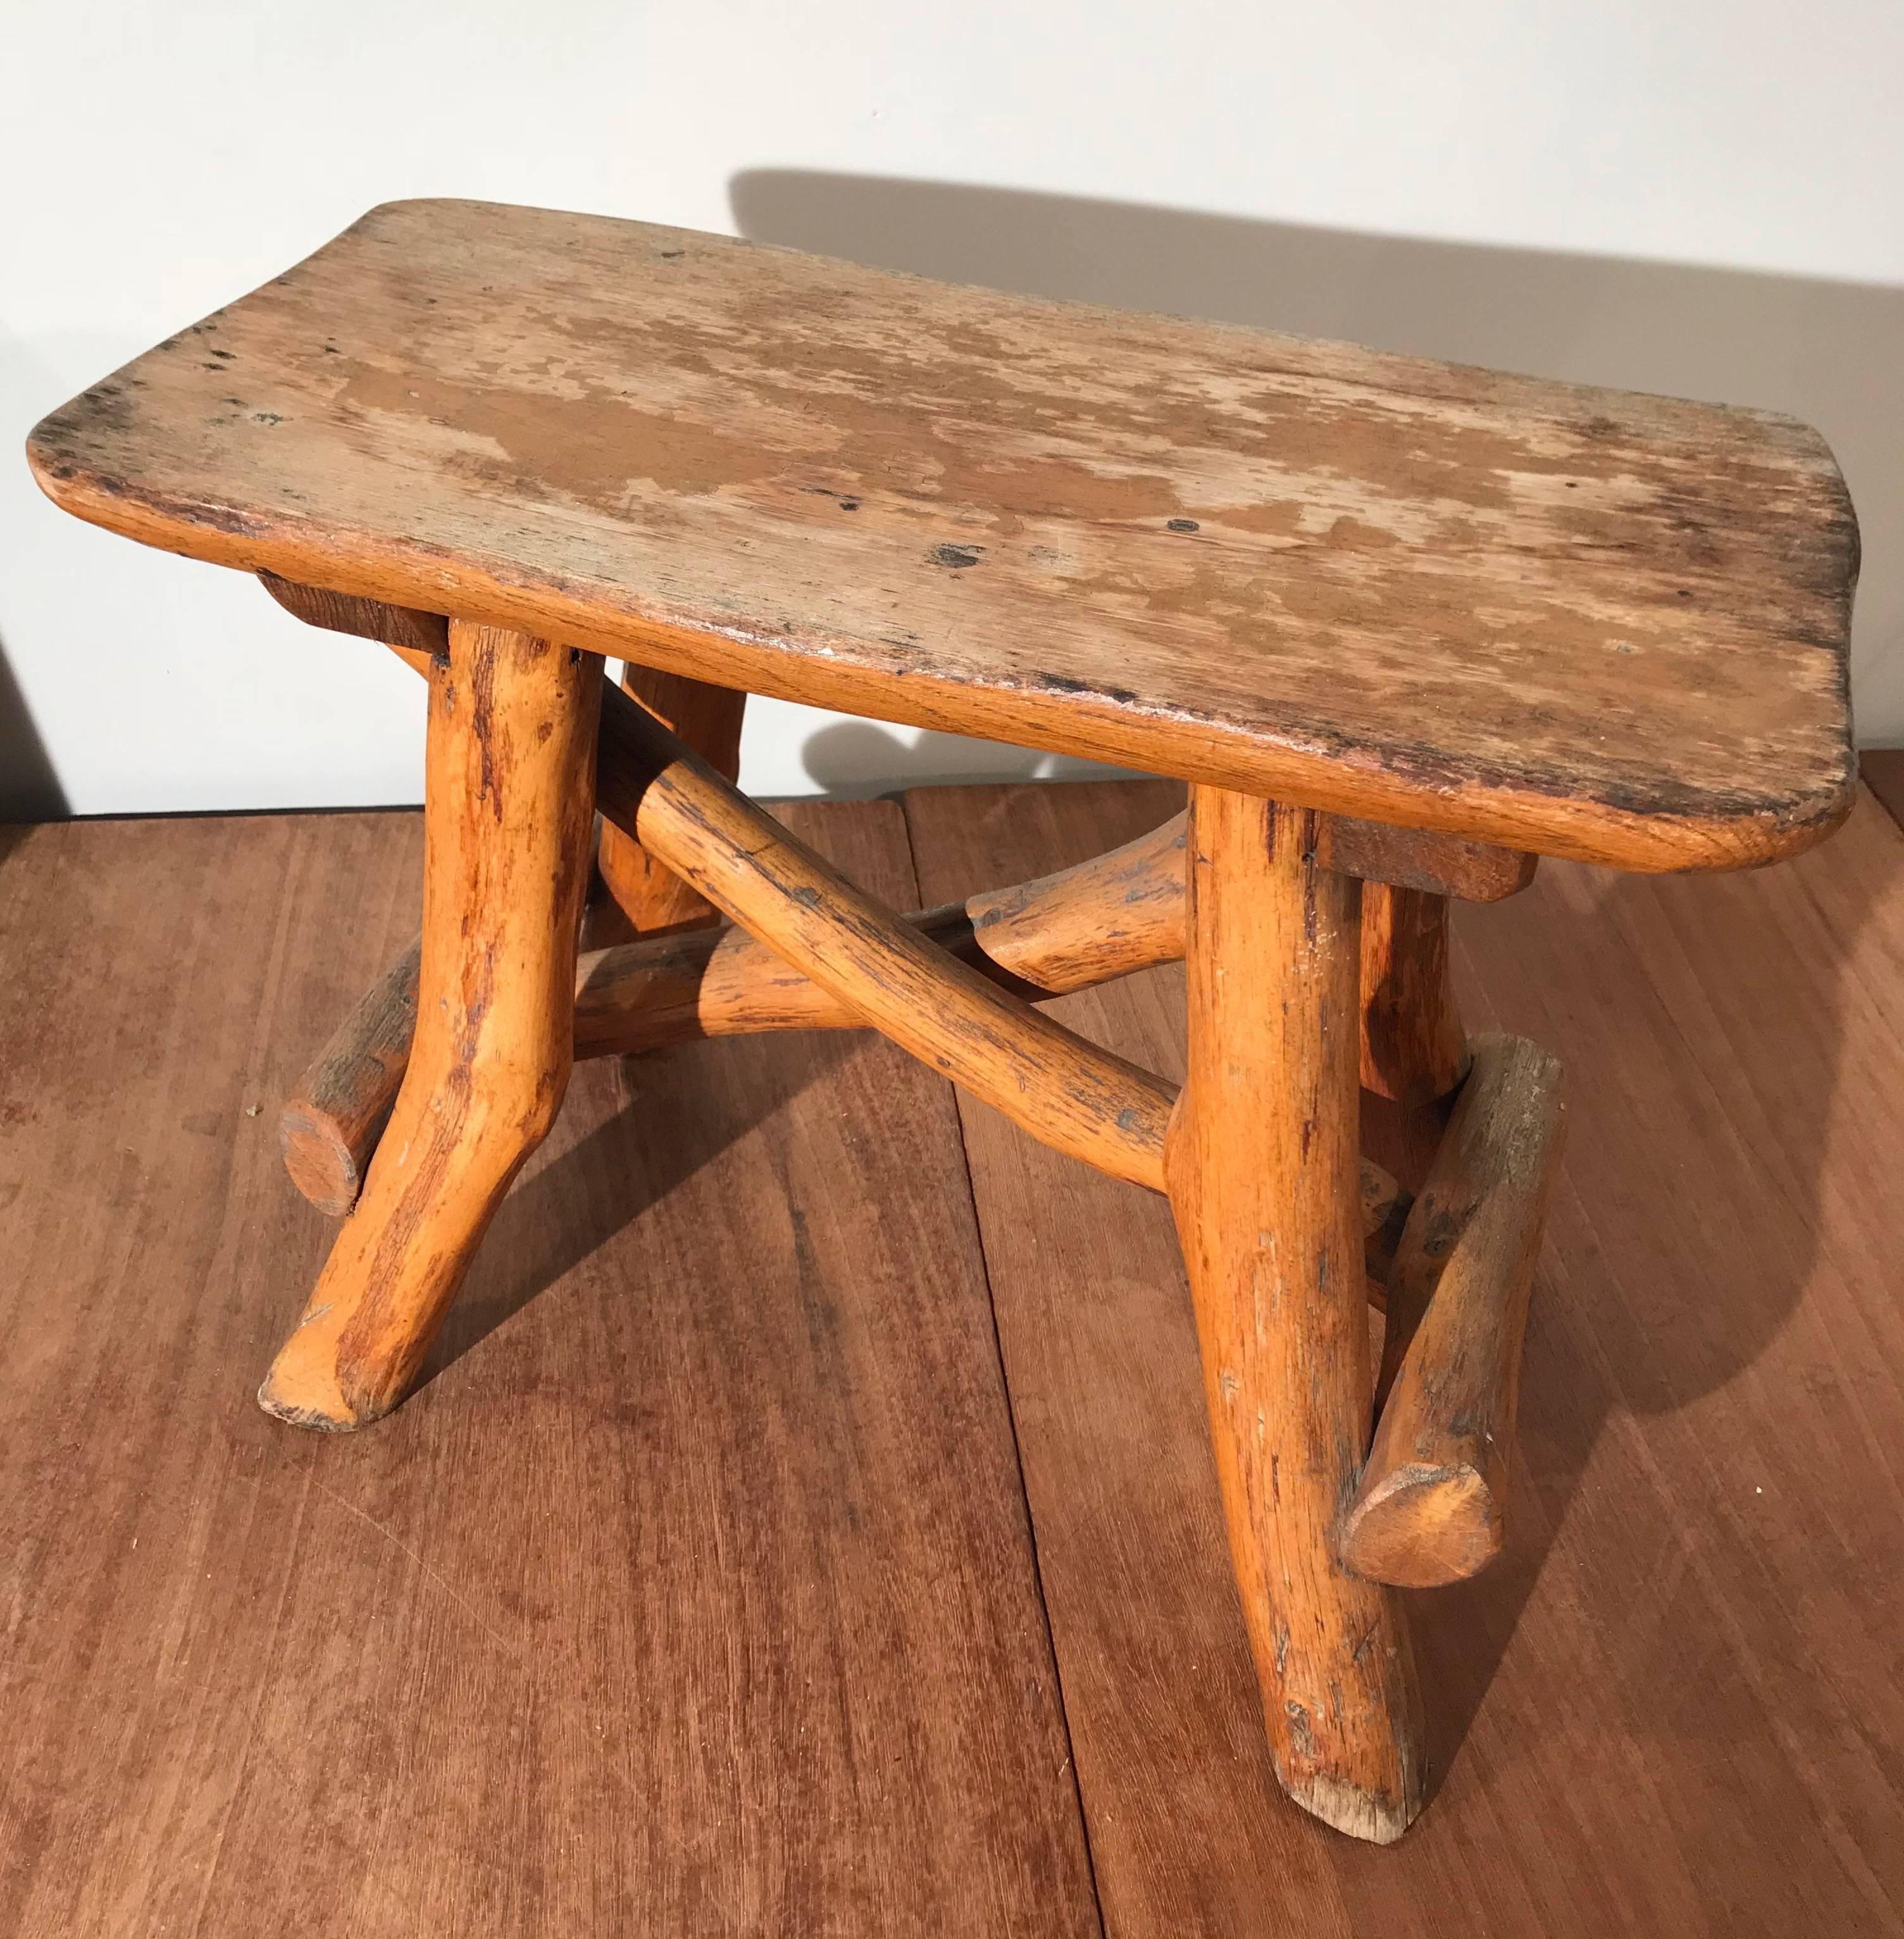 Top quality made and heavy little stool made of oak branches.

This rustic and perfectly original stool or table is made of natural tree branches and it dates back to the early 1900's. The look and feel of this piece is second to none and it is as